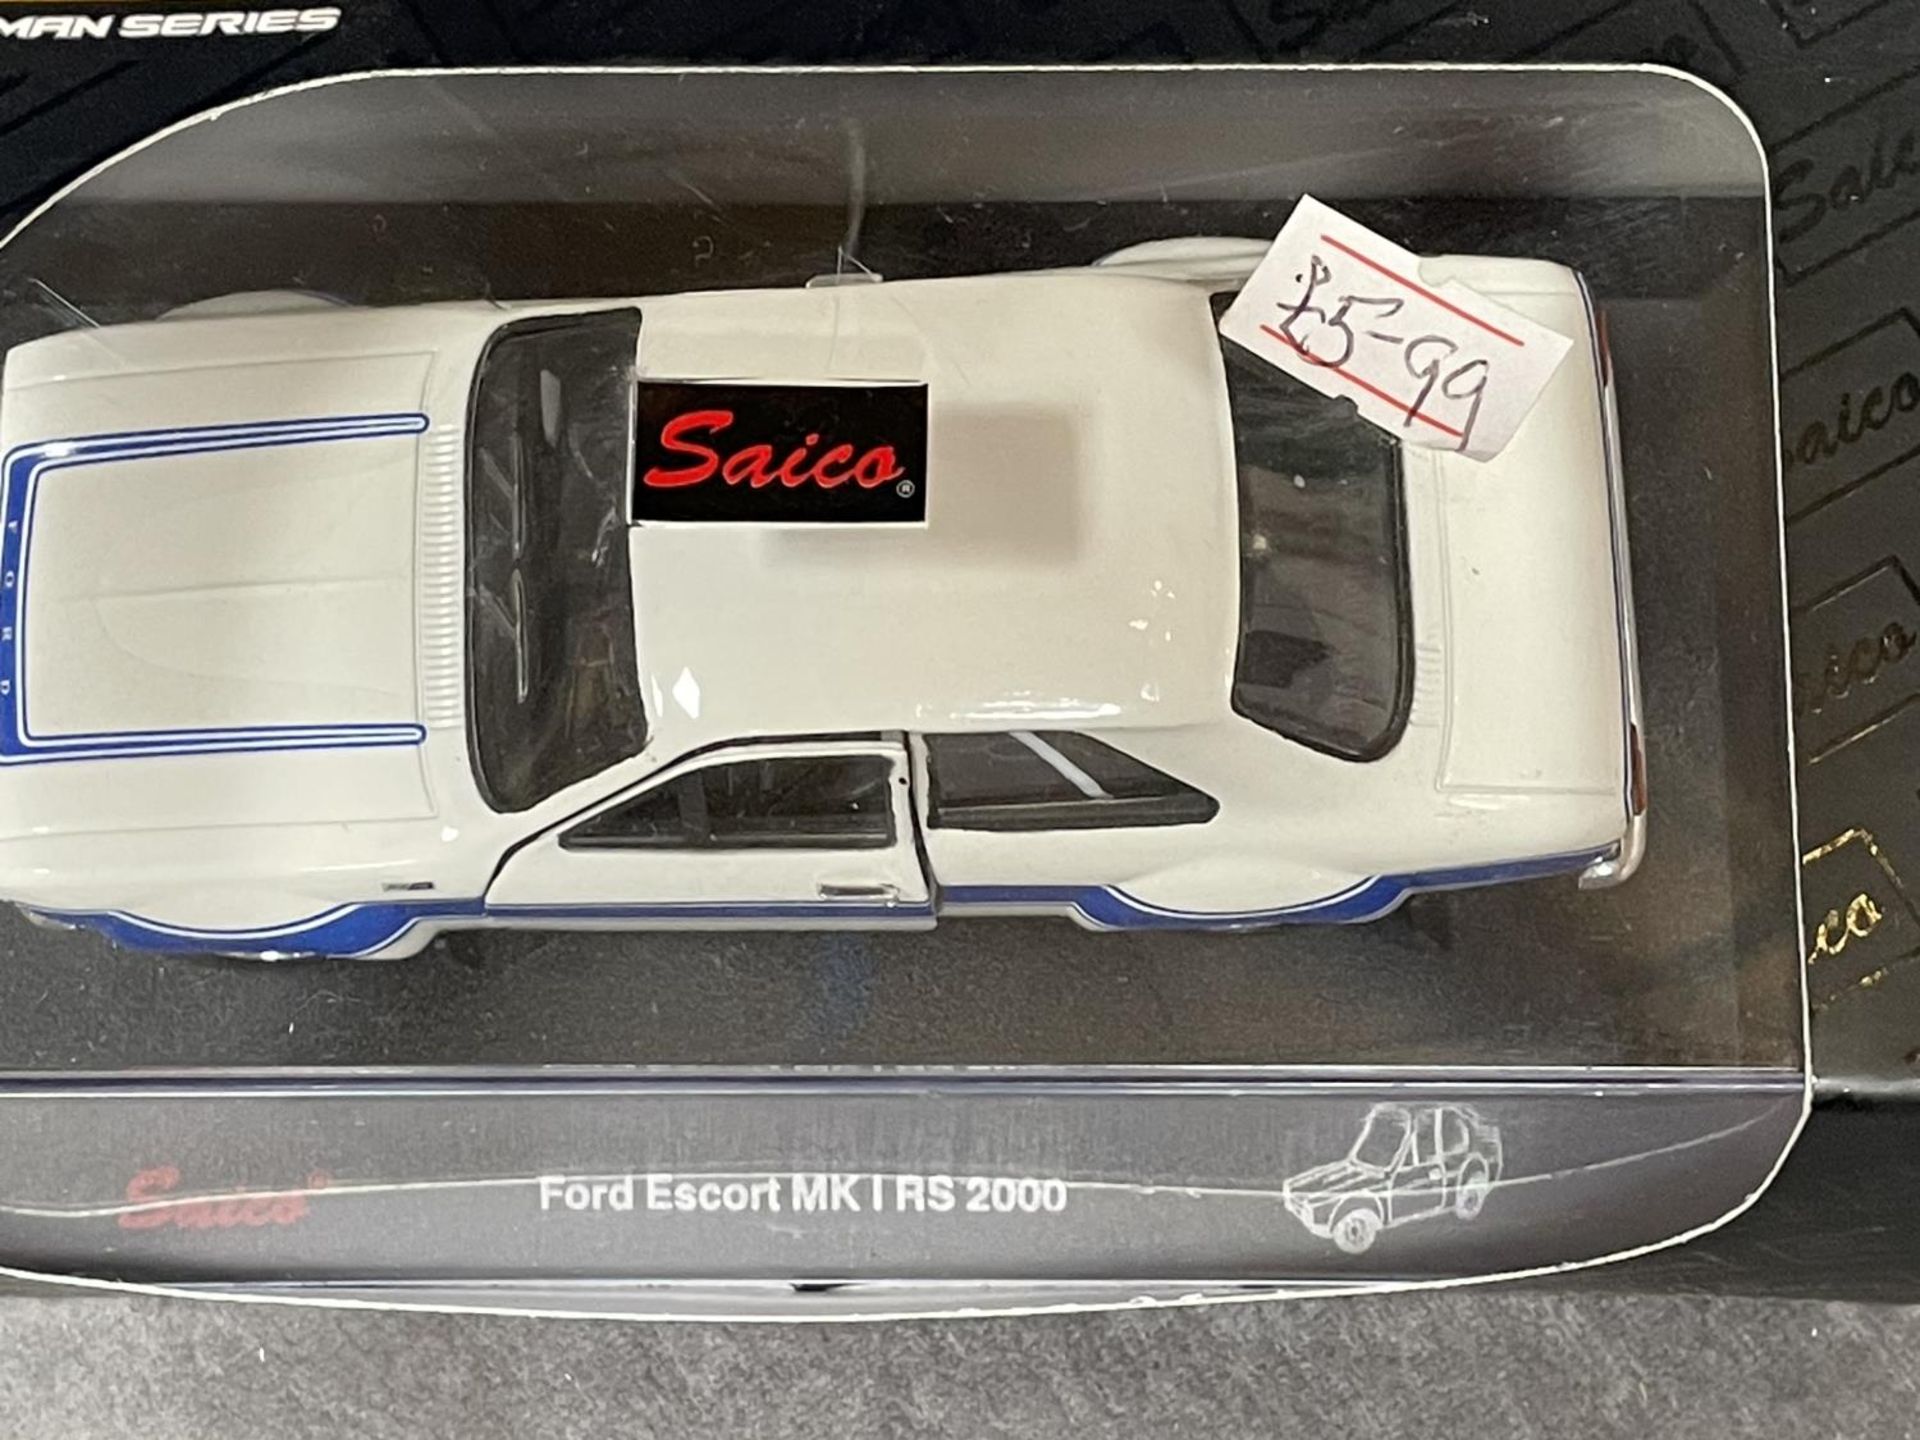 Saico Scale Models Craftsman Series #TY3884 Ford Escort MKI RS 2000 On Display Case And Box - Image 4 of 4